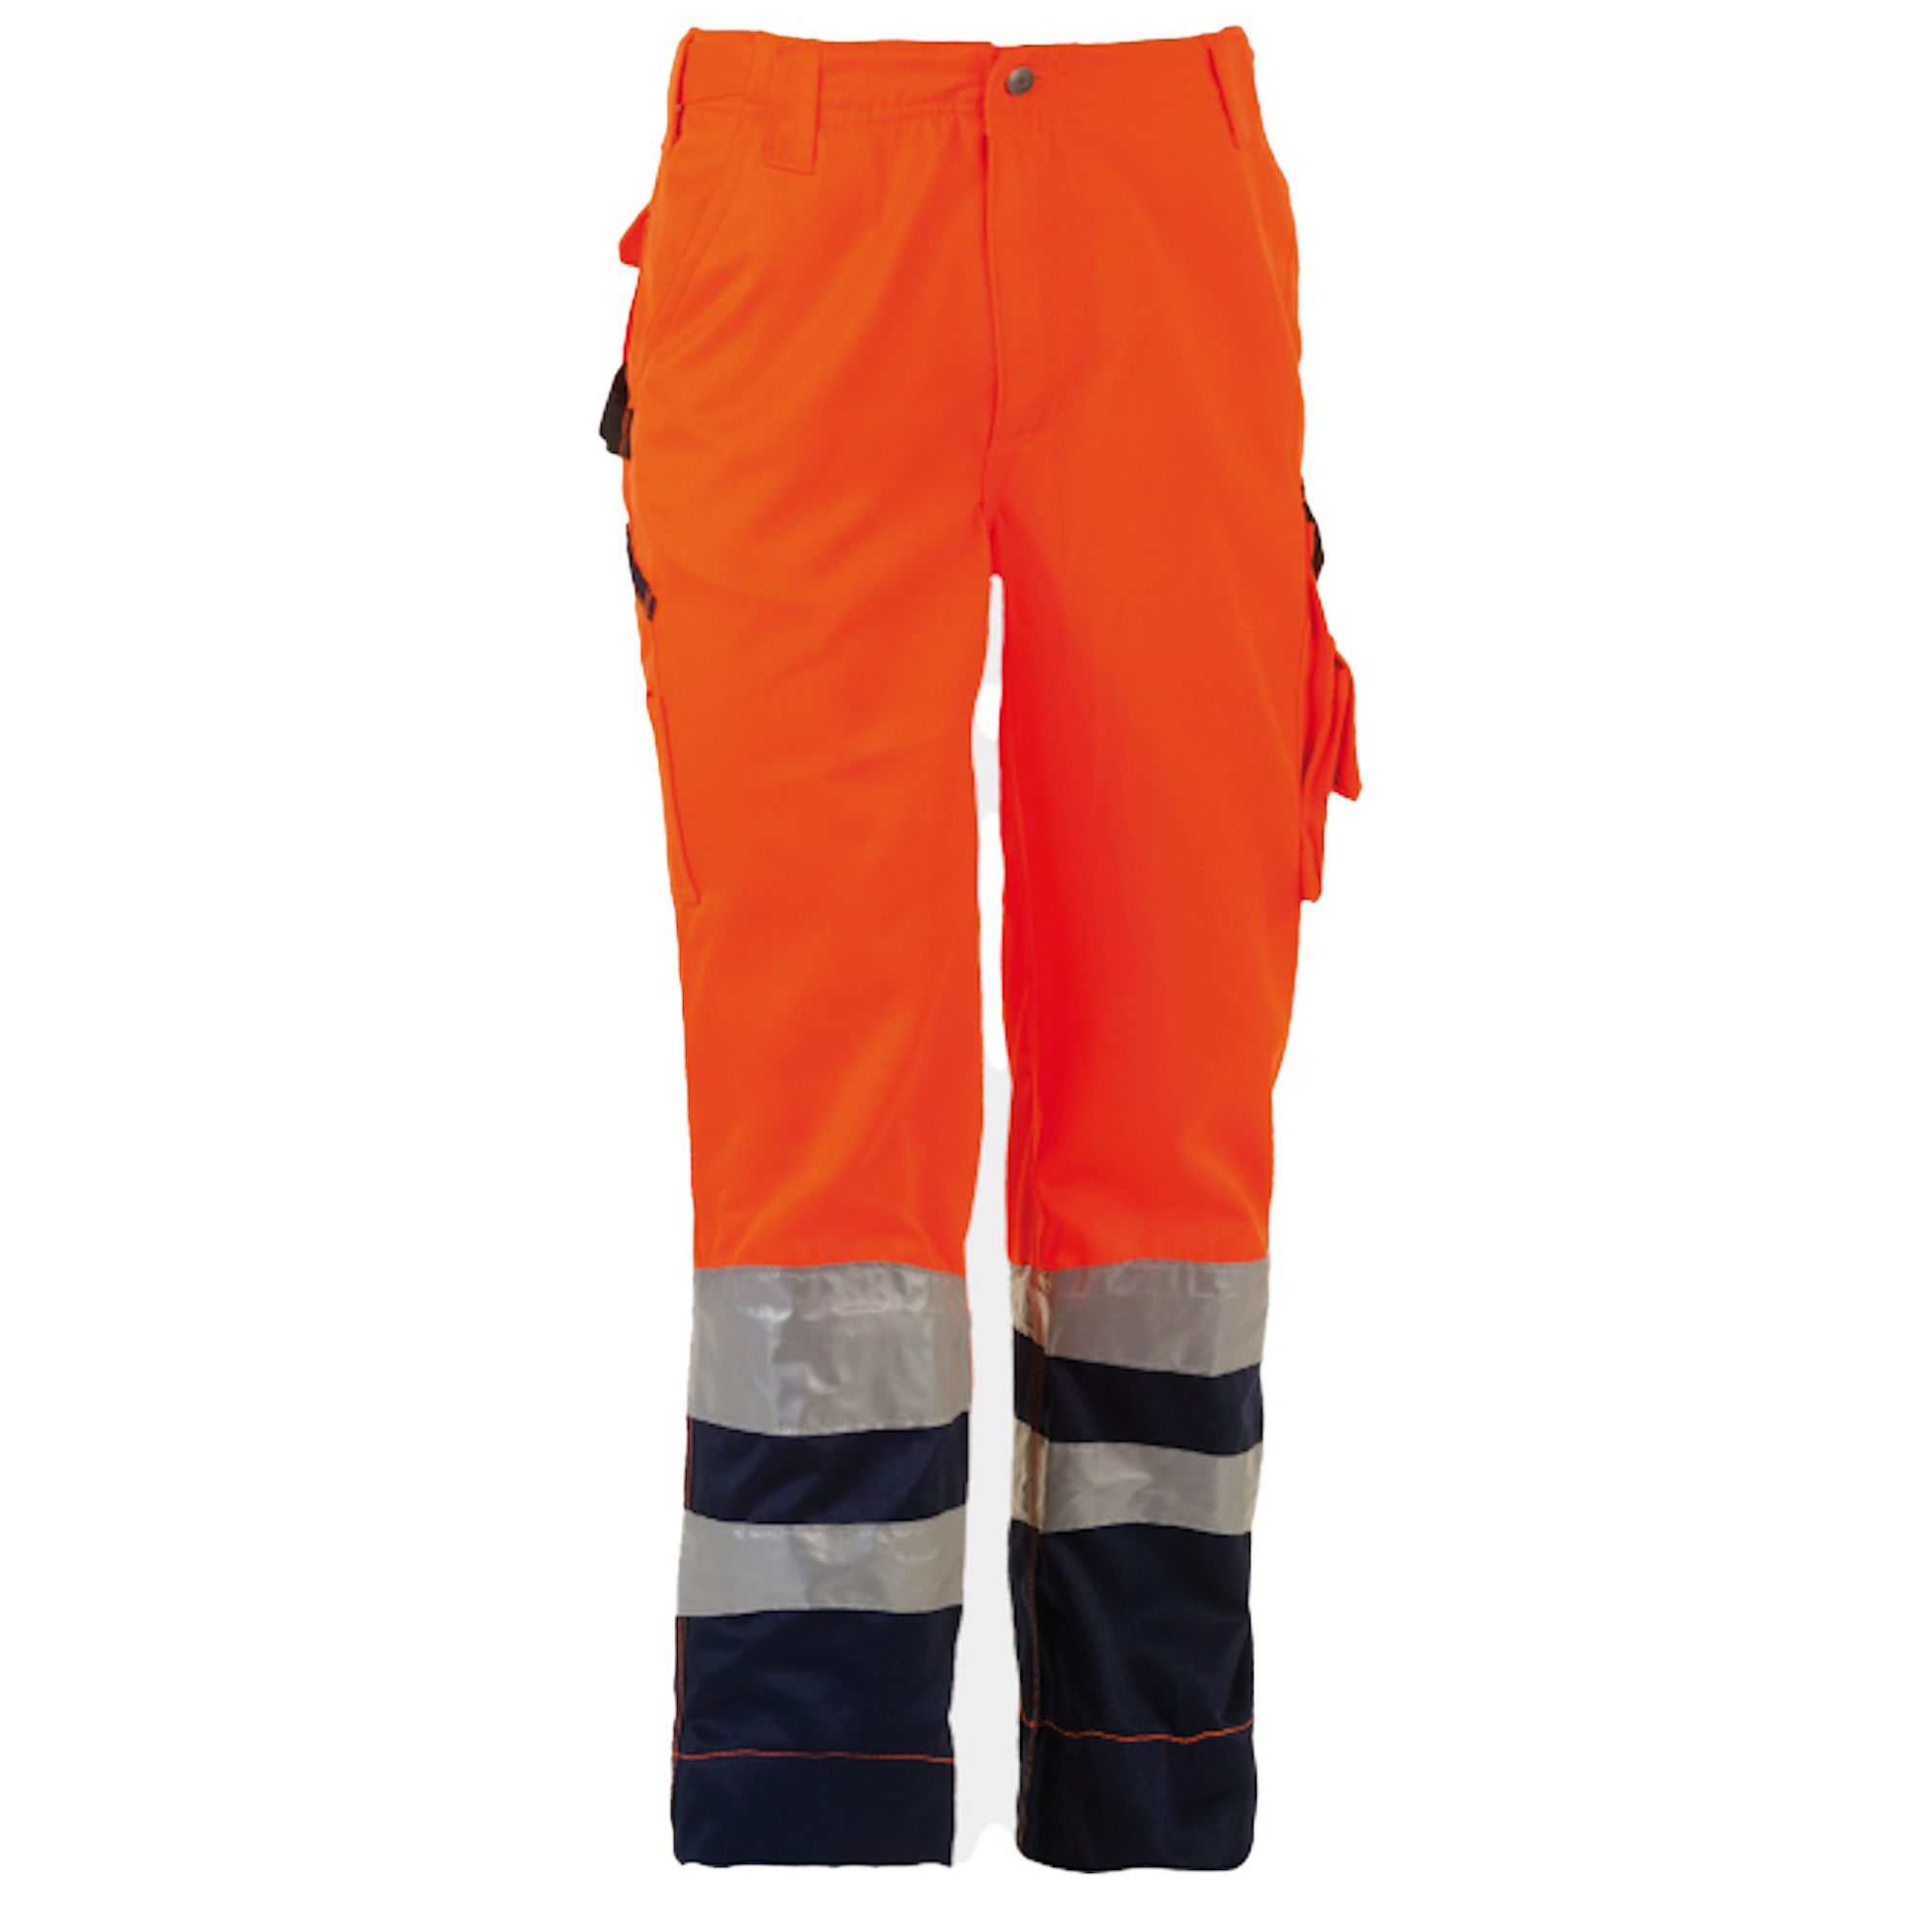 Orange Work Wear Pant at Rs 1000/piece in Ludhiana | ID: 15818347262